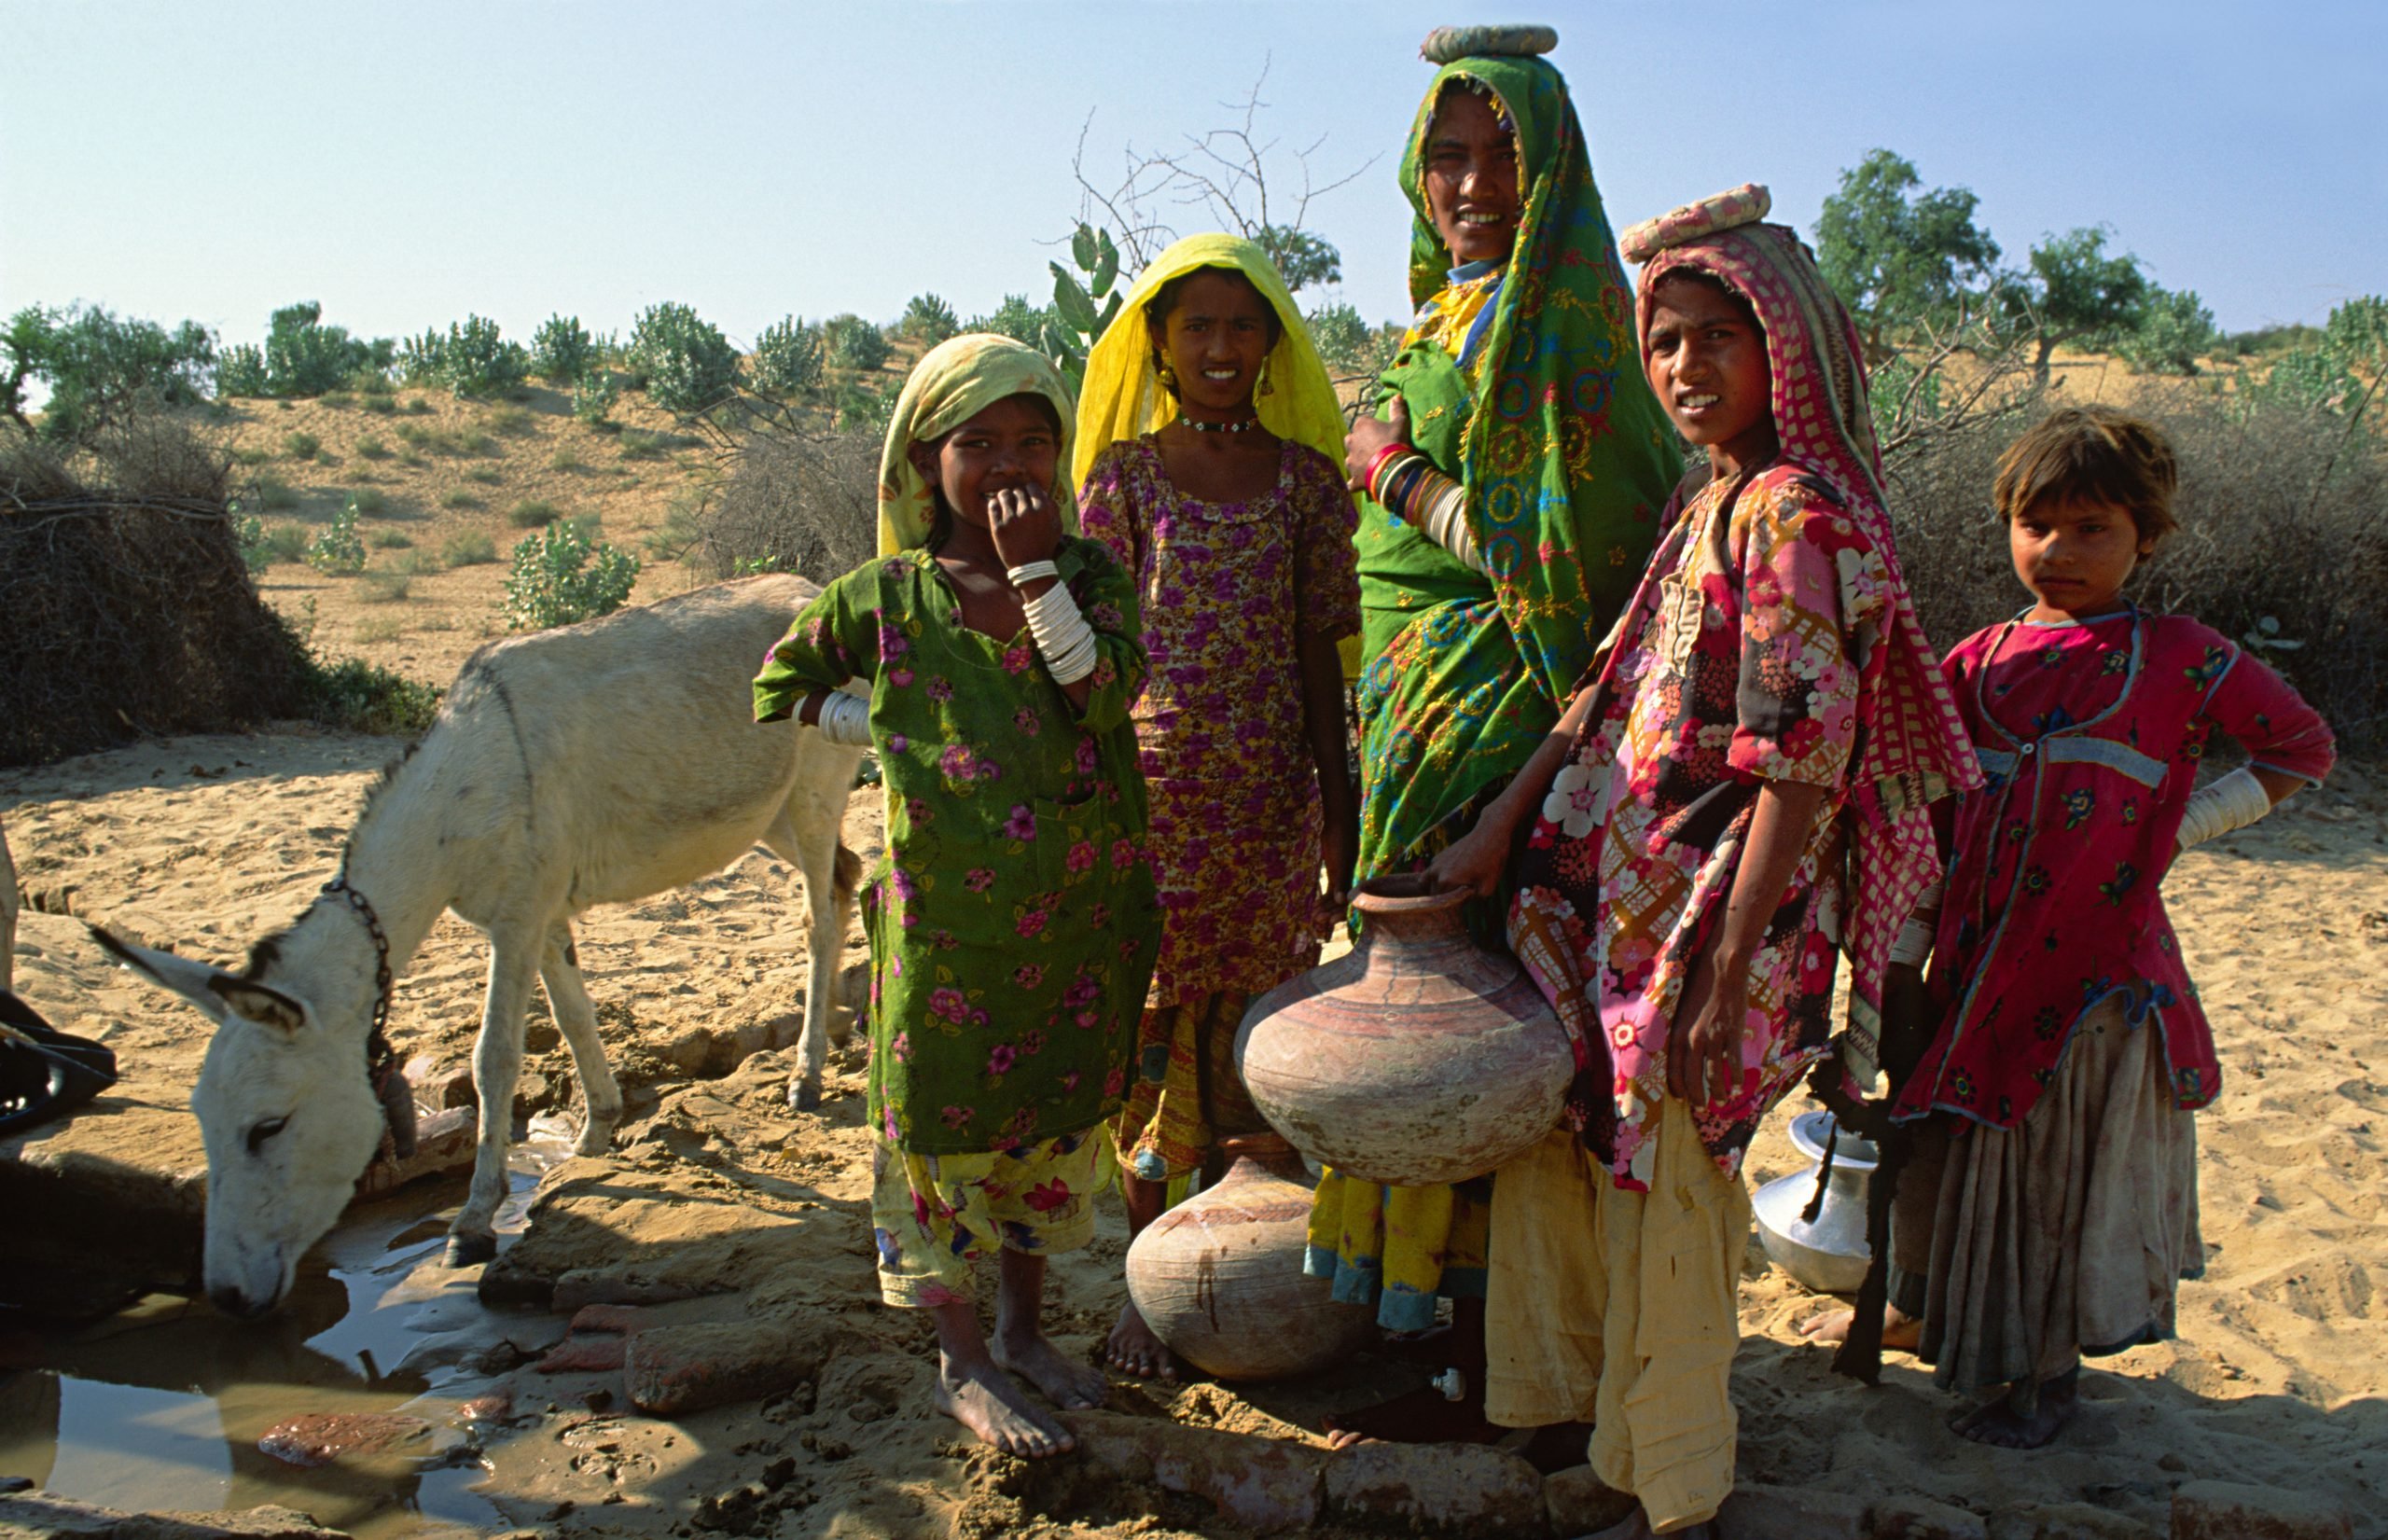 <p>Mother and daughters collecting water from the village well in the arid region of Thar desert, Pakistan Sindh province. Image source: Neil Cooper / Alamy</p>